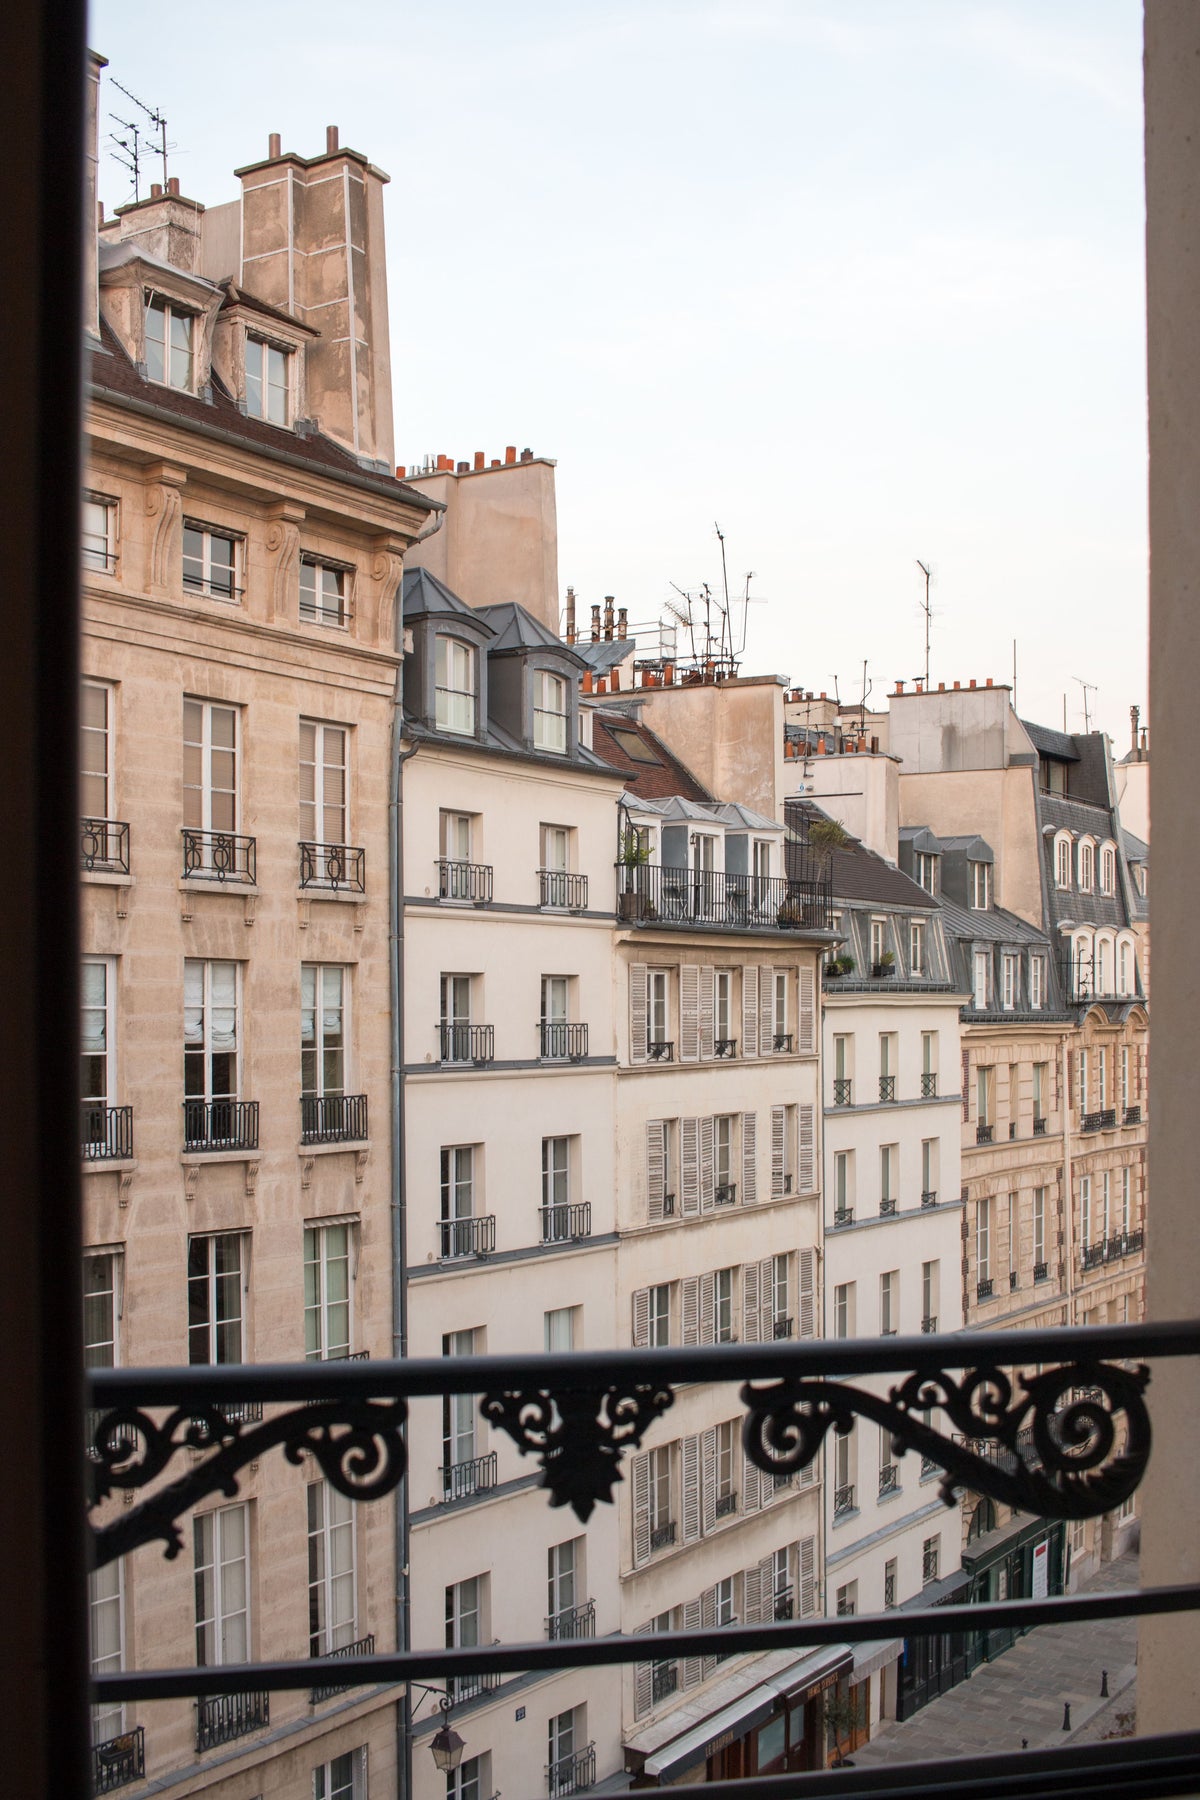 Waking up in Place Dauphine